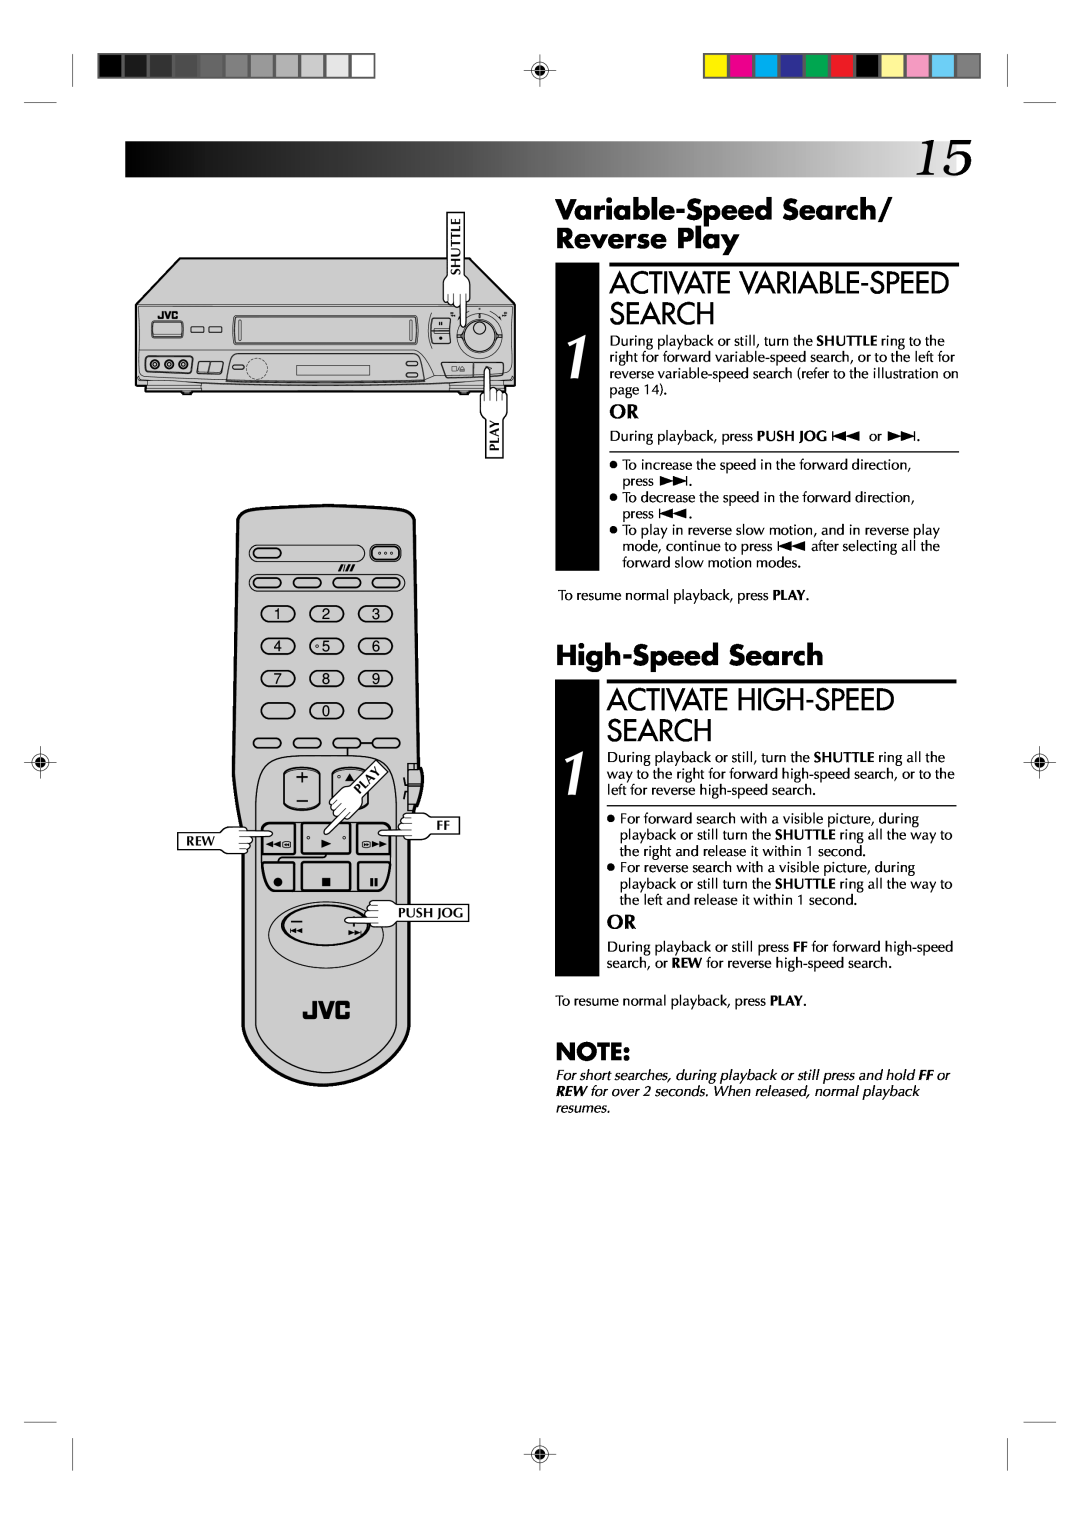 JVC HR-J631T manual Activate Variable-Speed Search, Activate High-Speed Search, Variable-Speed Search Reverse Play 